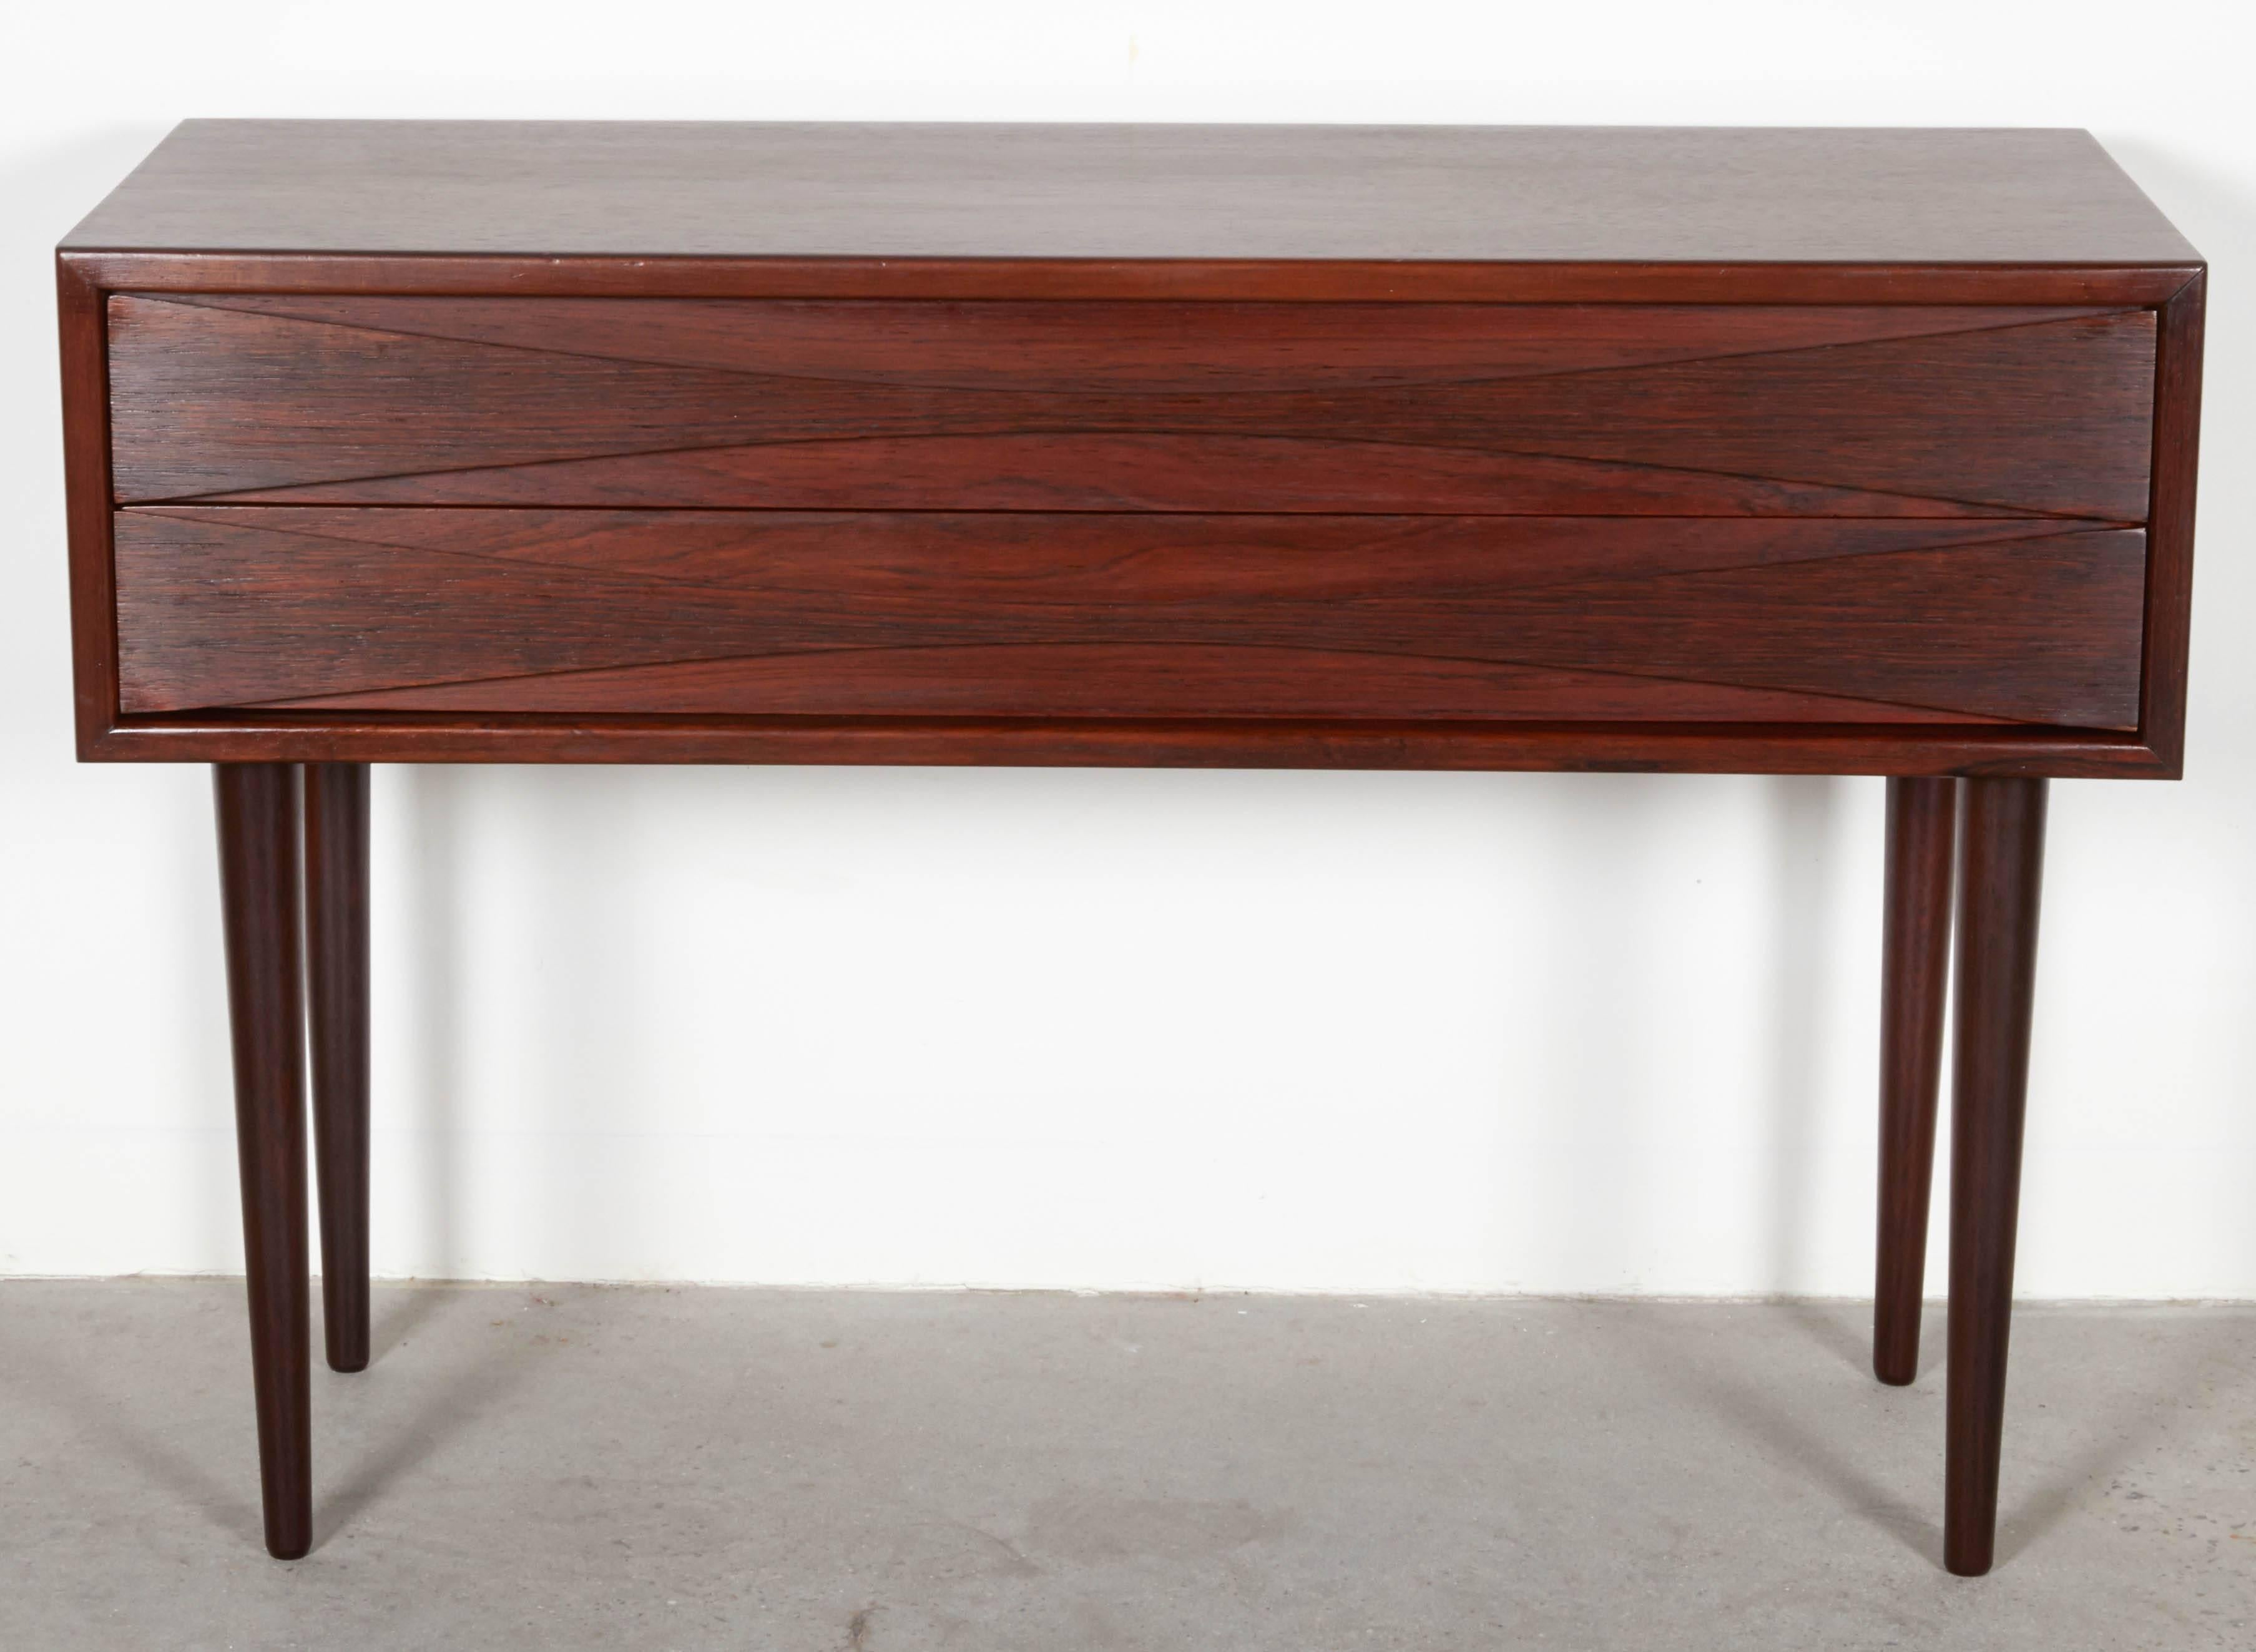 Vintage 1960s Sibast Bow Tie Bedside Table by Arne Vodder 

This rosewood nightstand has two drawers and have Arne Vodder's Classic, signature bowtie shaped pulls. Ready for pick up, delivery or shipping anywhere in the world.